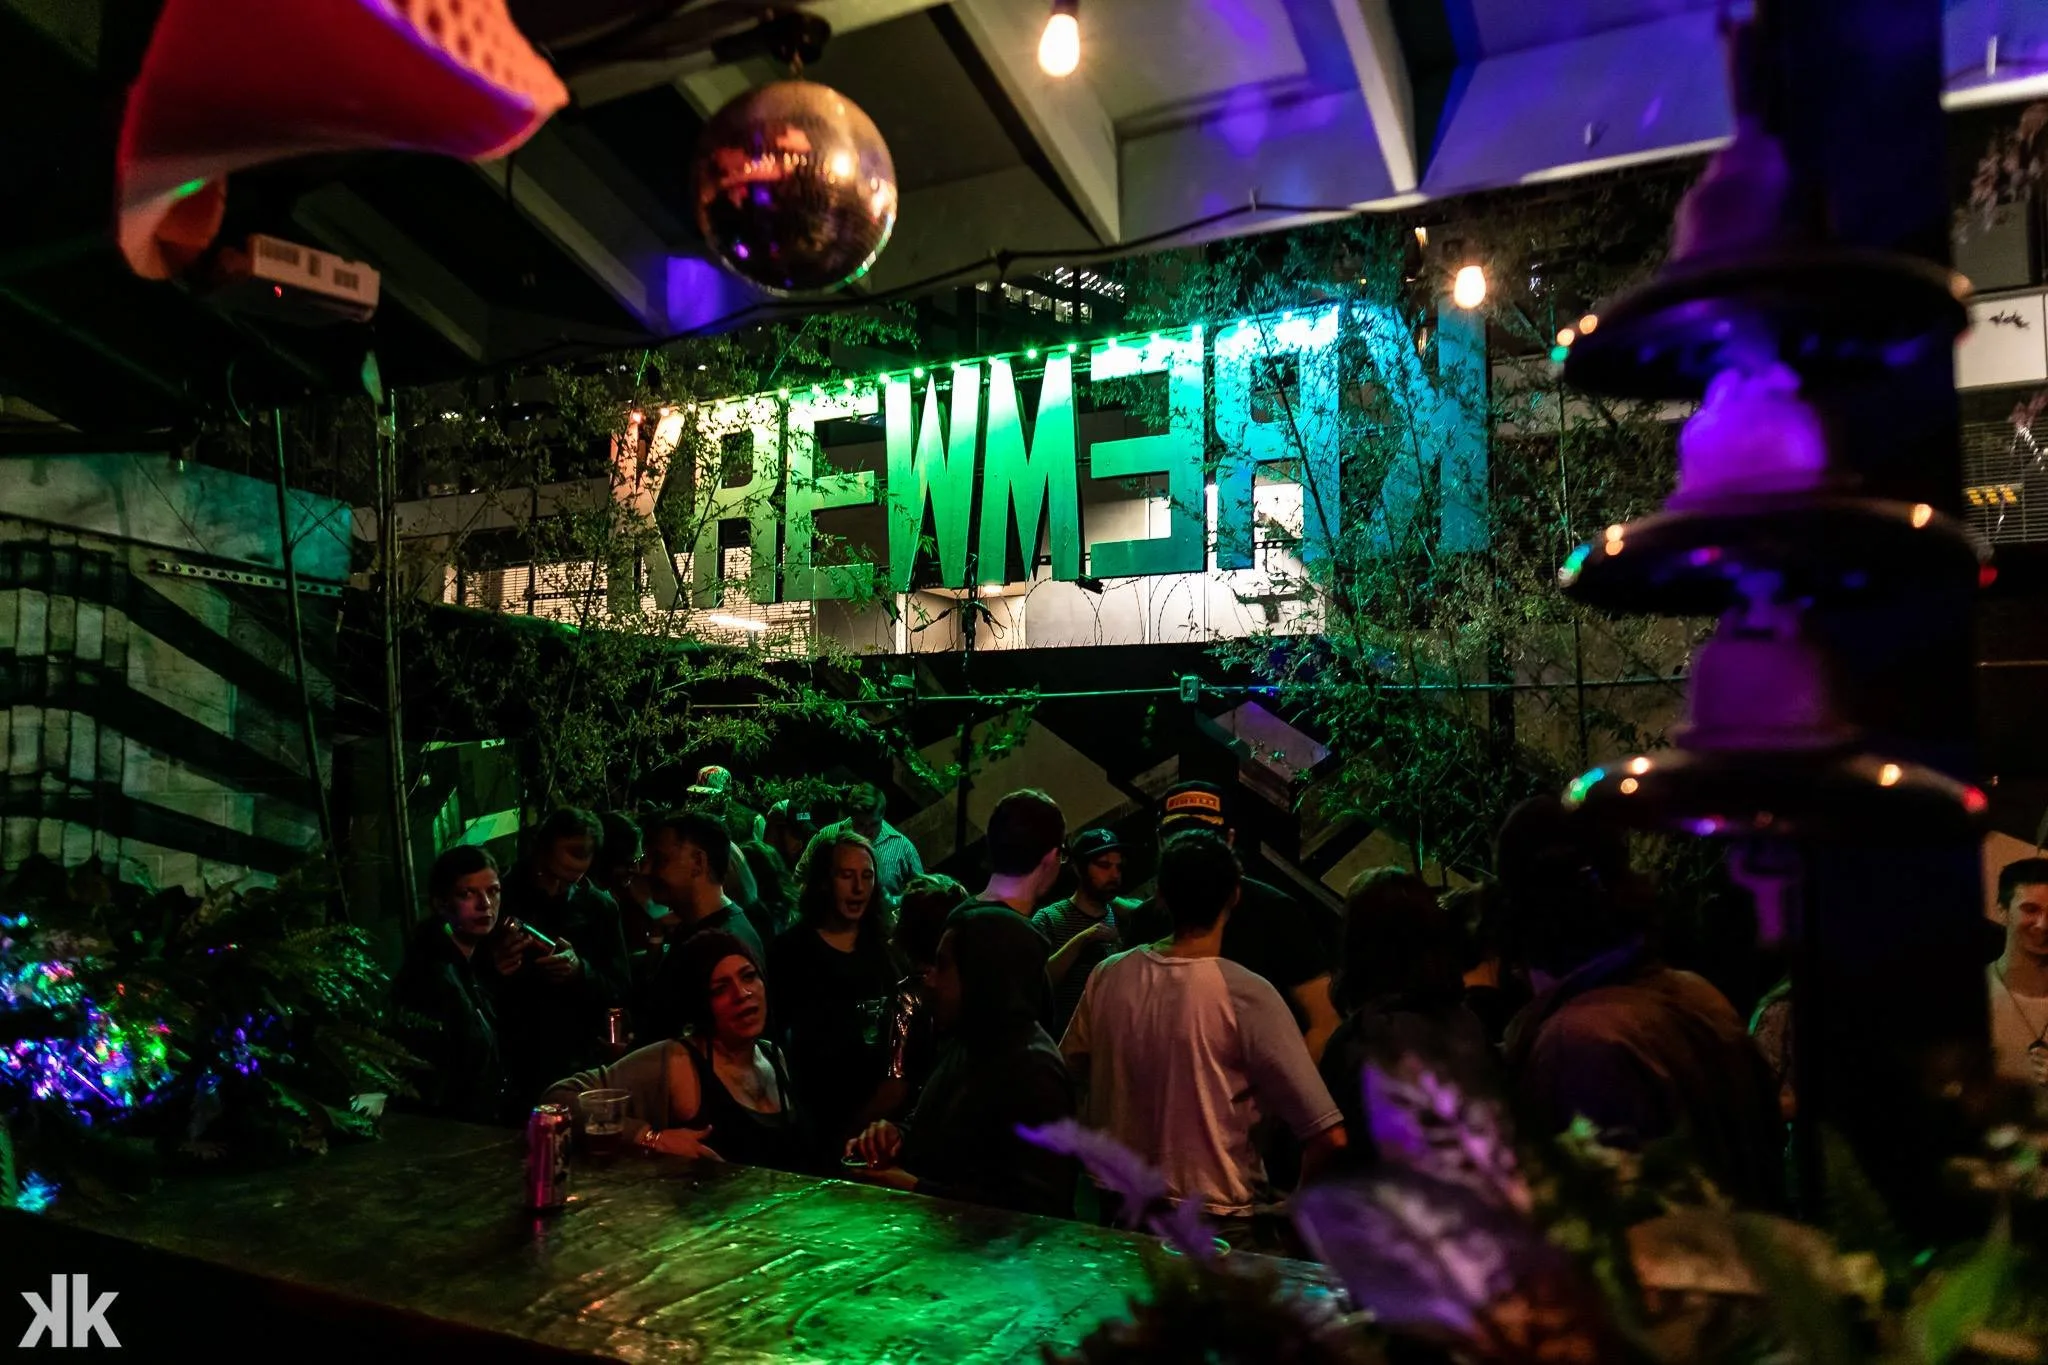 the patio of kremwerk with a lit-up sign